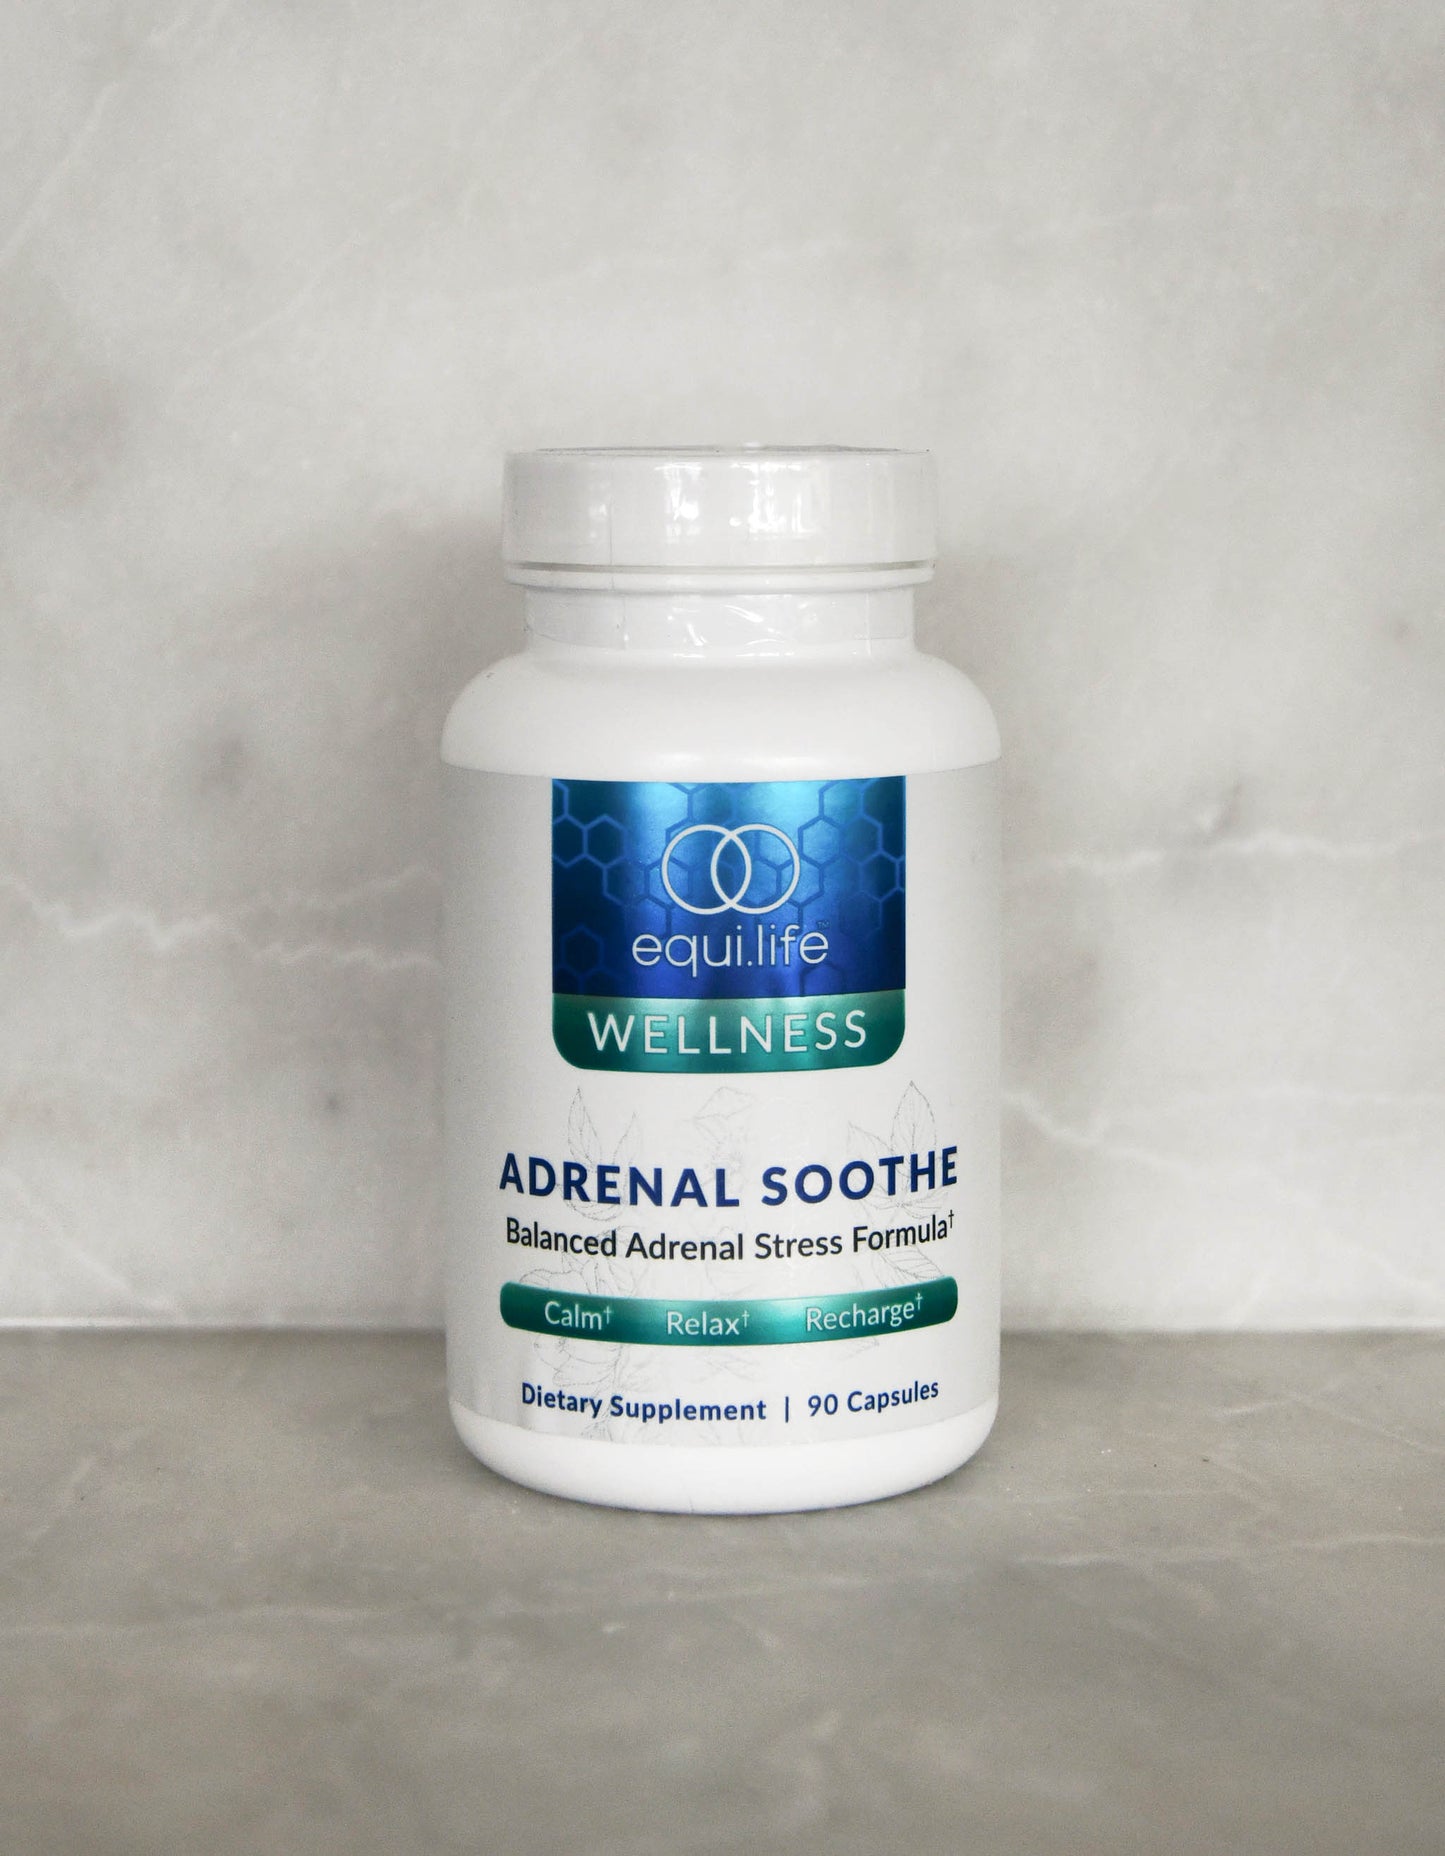 Adrenal Soothe